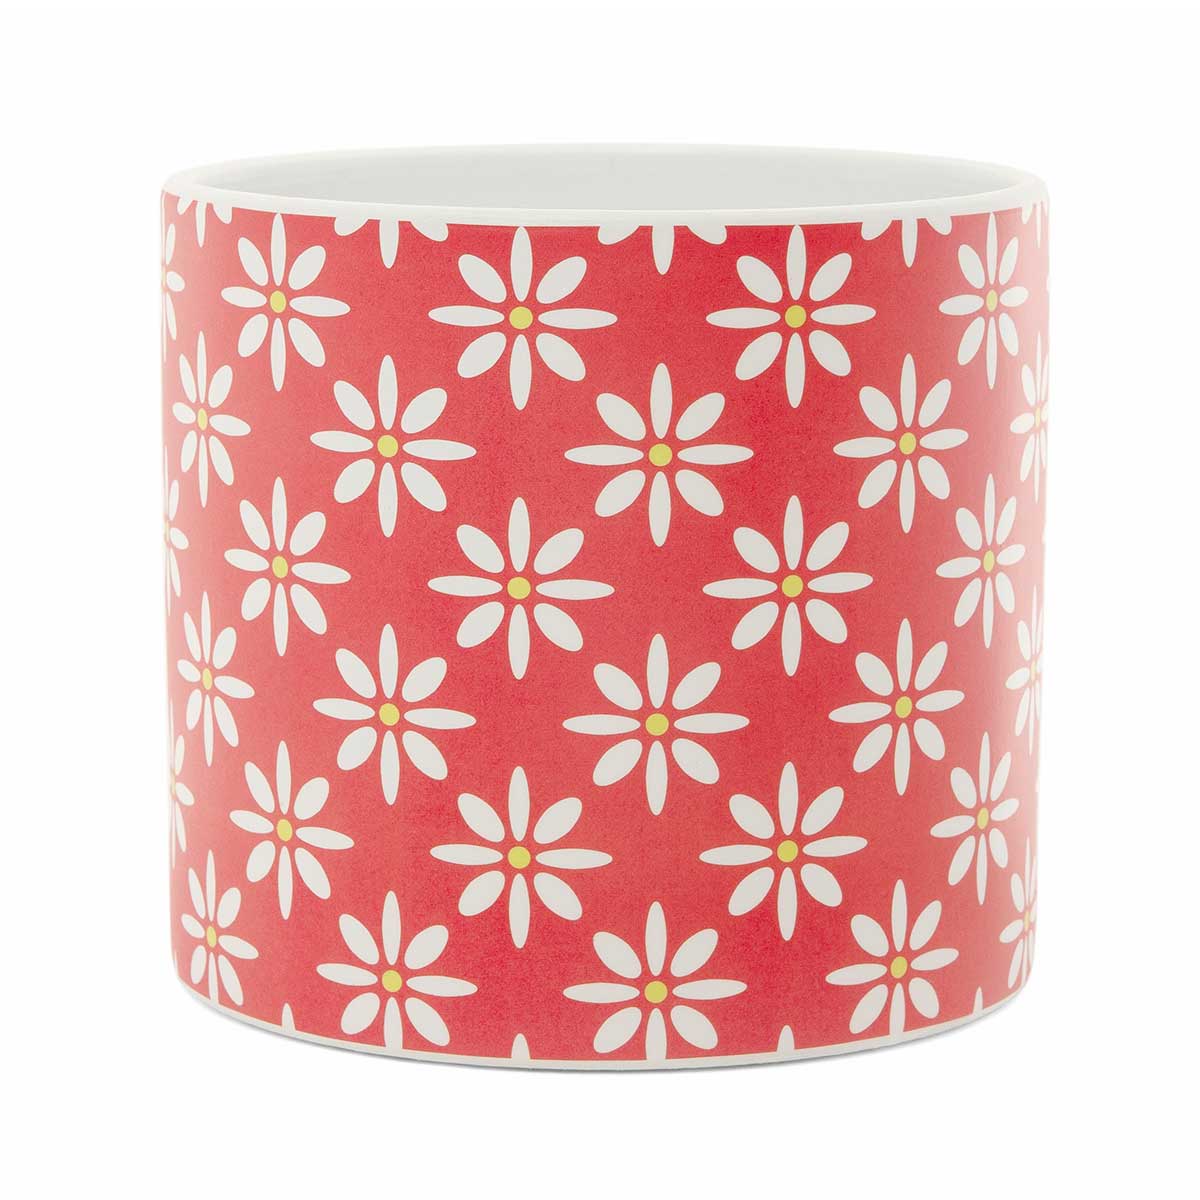 POT CORAL FAIR DAISY LARGE 5.25IN X 4.75IN CORAL/WHITE CERAMIC